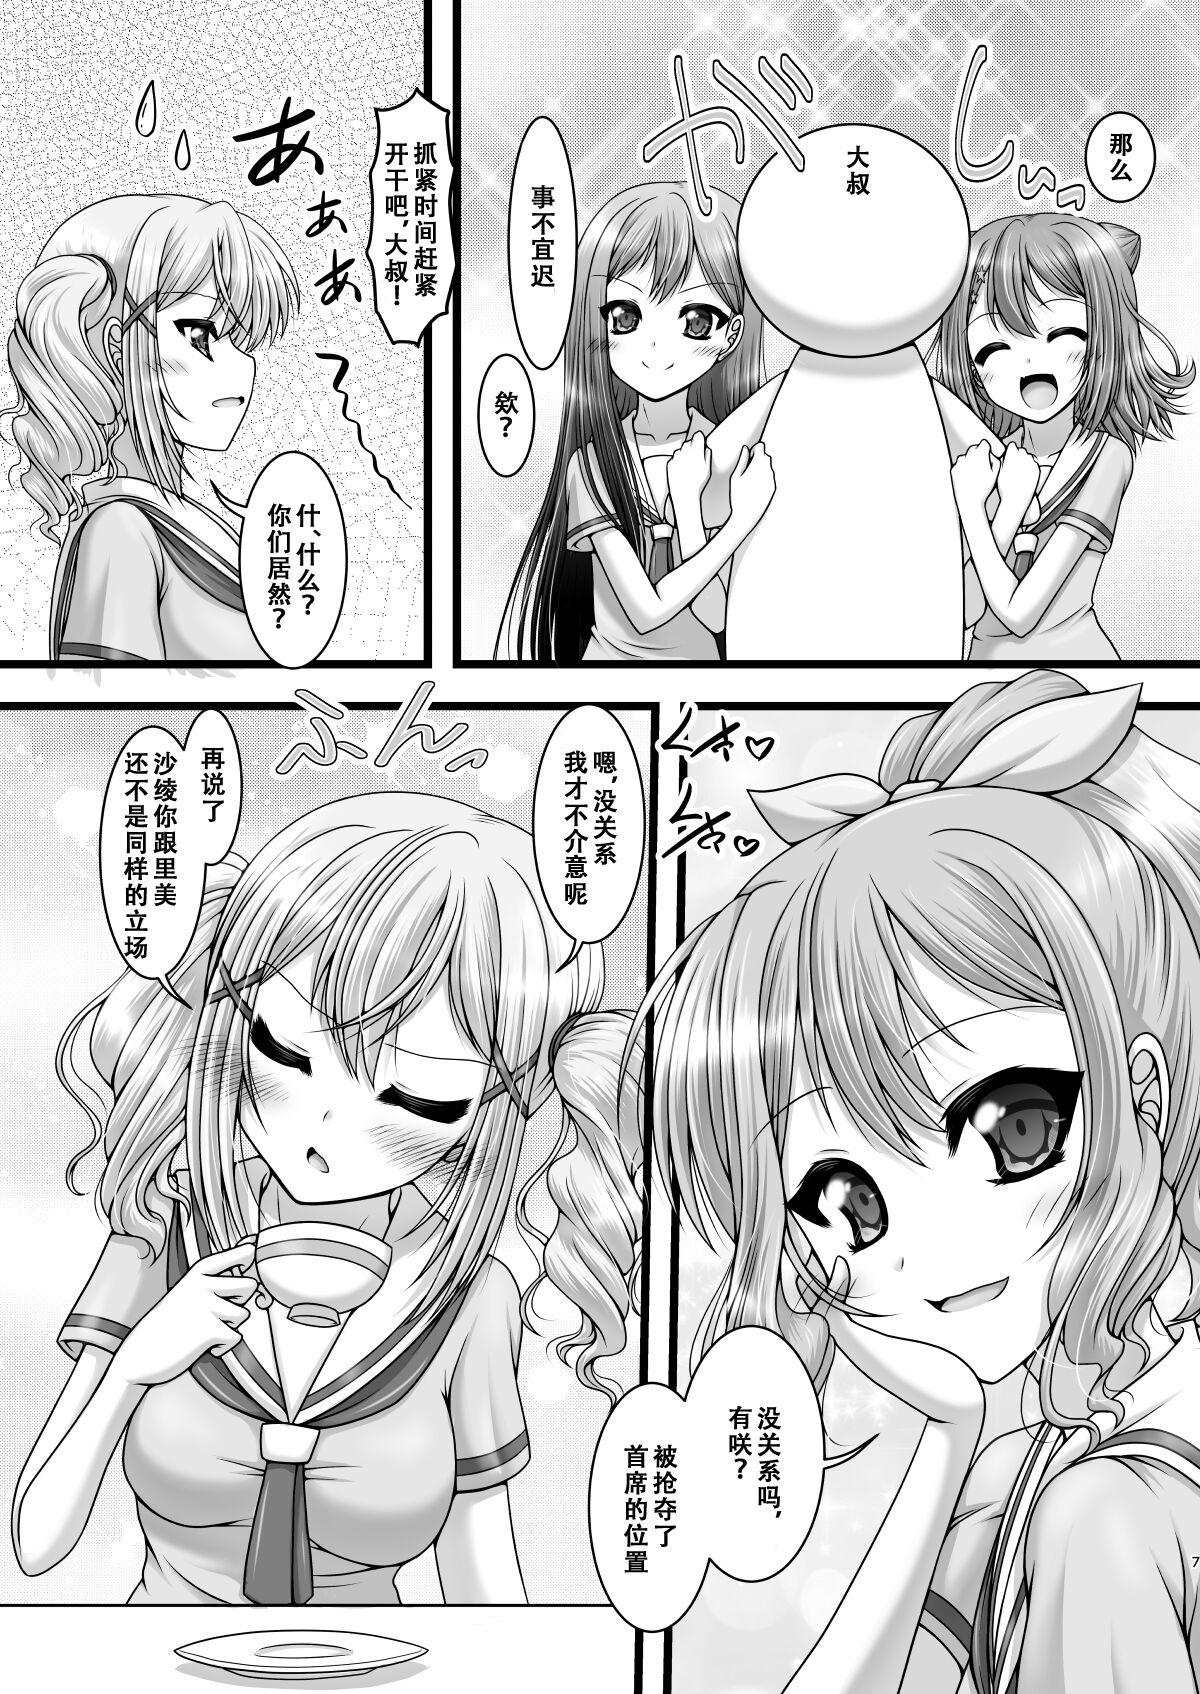 Massages Twinkle Express - Bang dream Jacking Off - Page 7